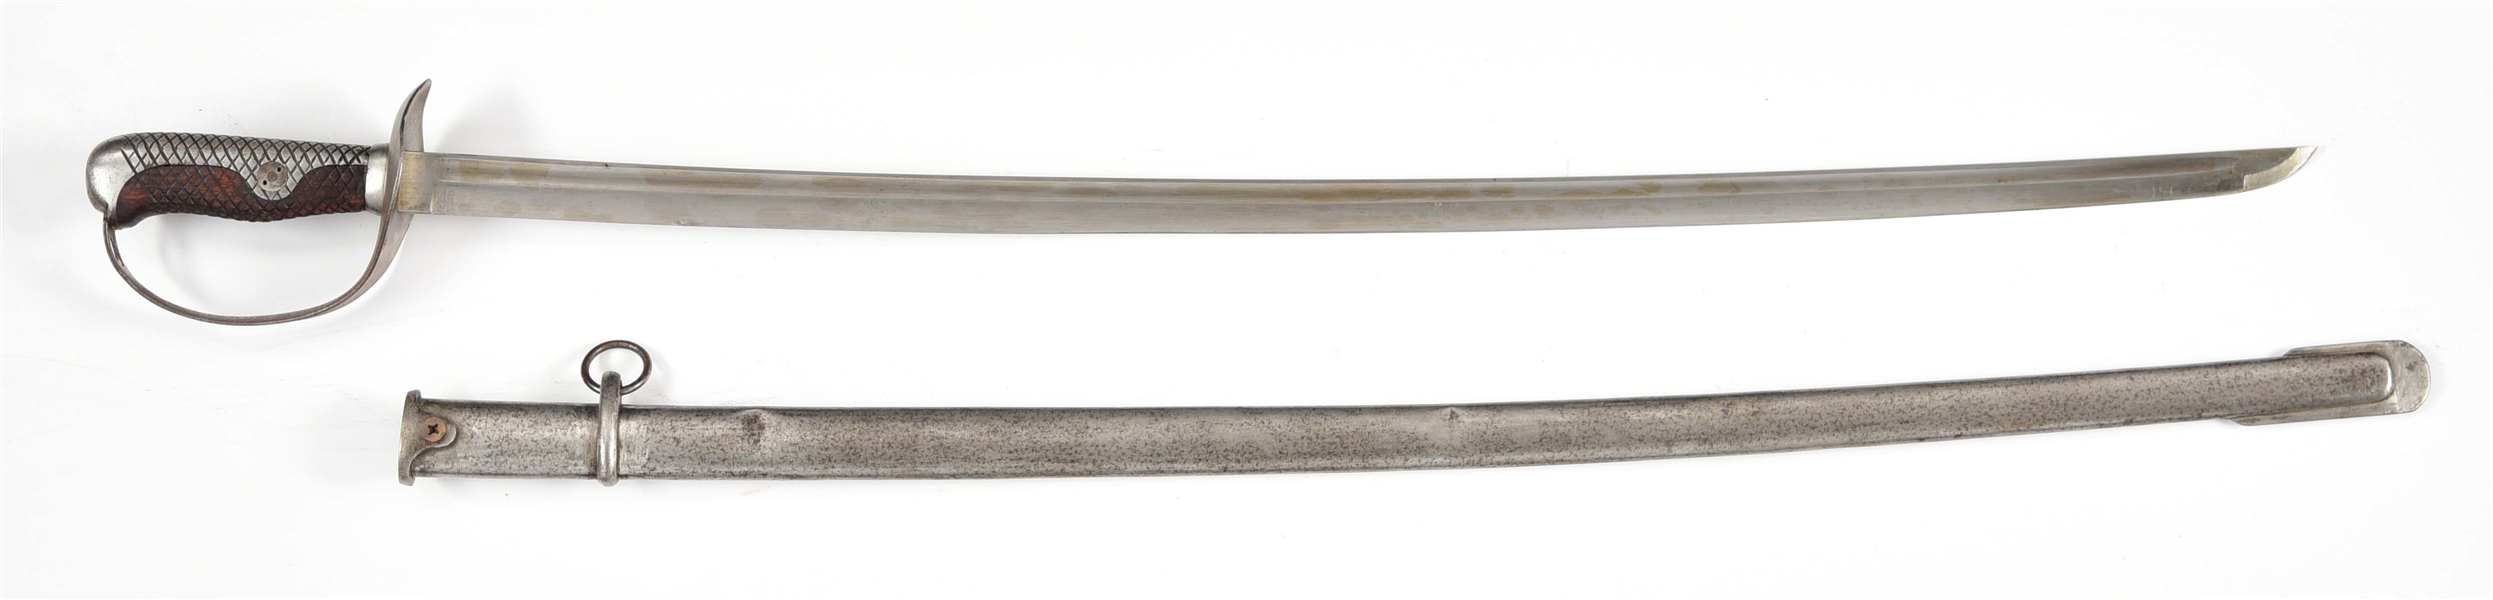 HILTED SWORD WITH CHECKERED WOODEN HANDLE.